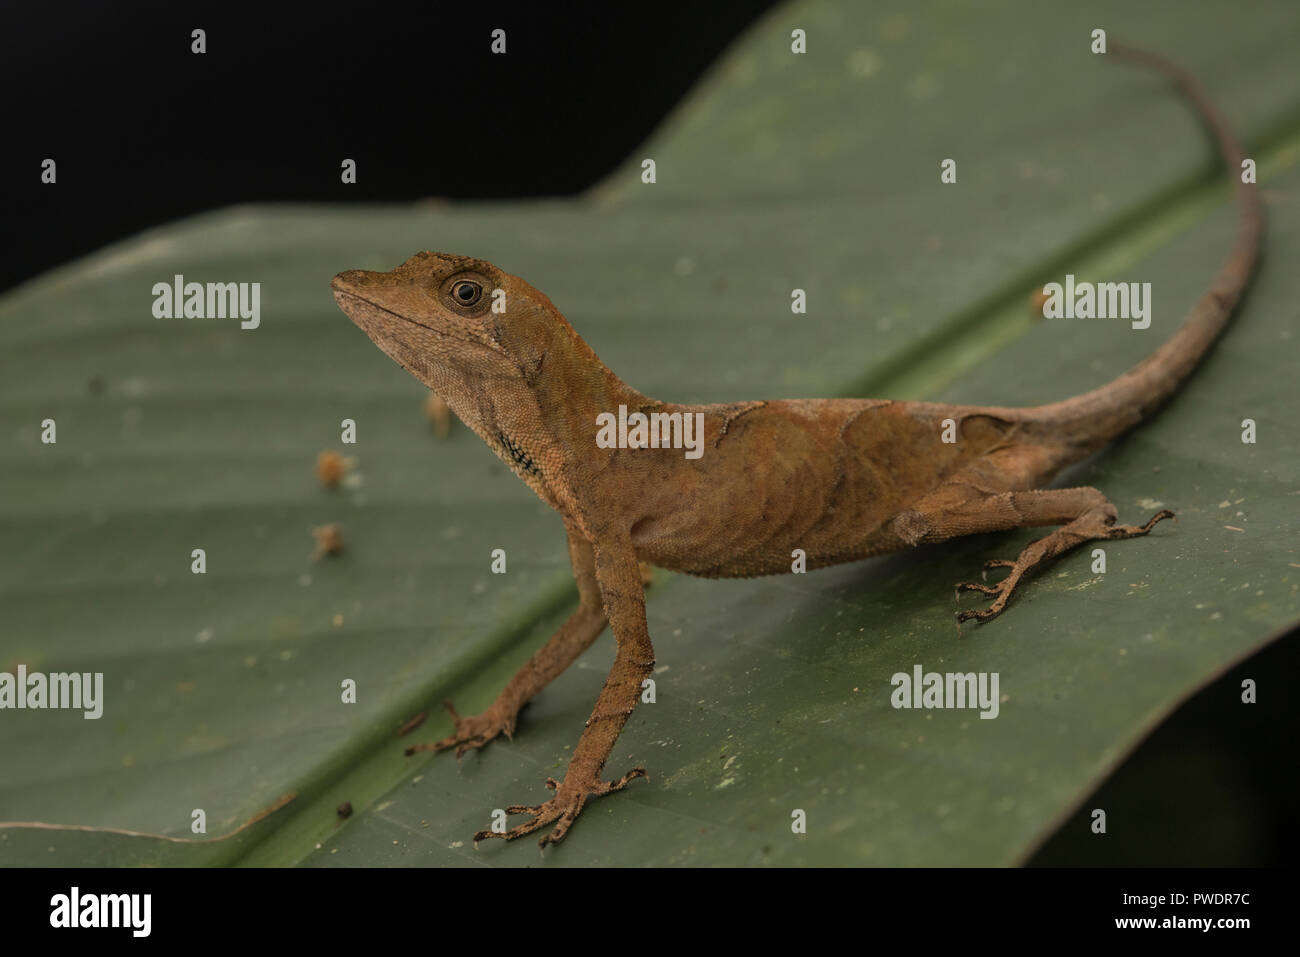 A goldenscale anole (Anolis nitens/chrysolepis) from the rain forest of Southern Peru. Stock Photo